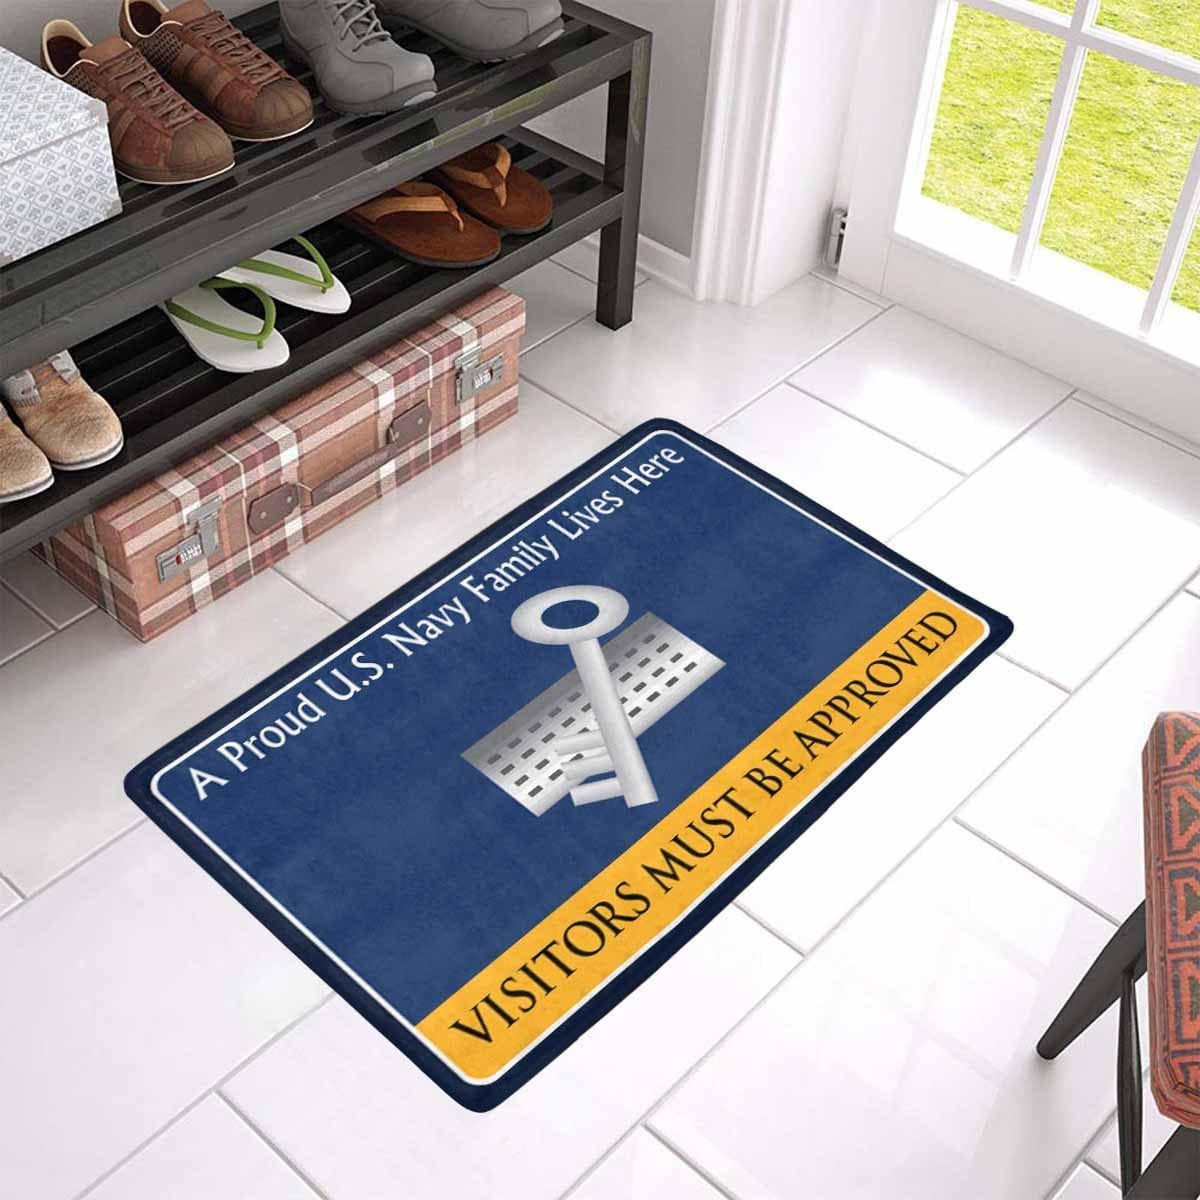 Navy Disbursing Clerk Navy DK Family Doormat - Visitors must be approved (23,6 inches x 15,7 inches)-Doormat-Navy-Rate-Veterans Nation